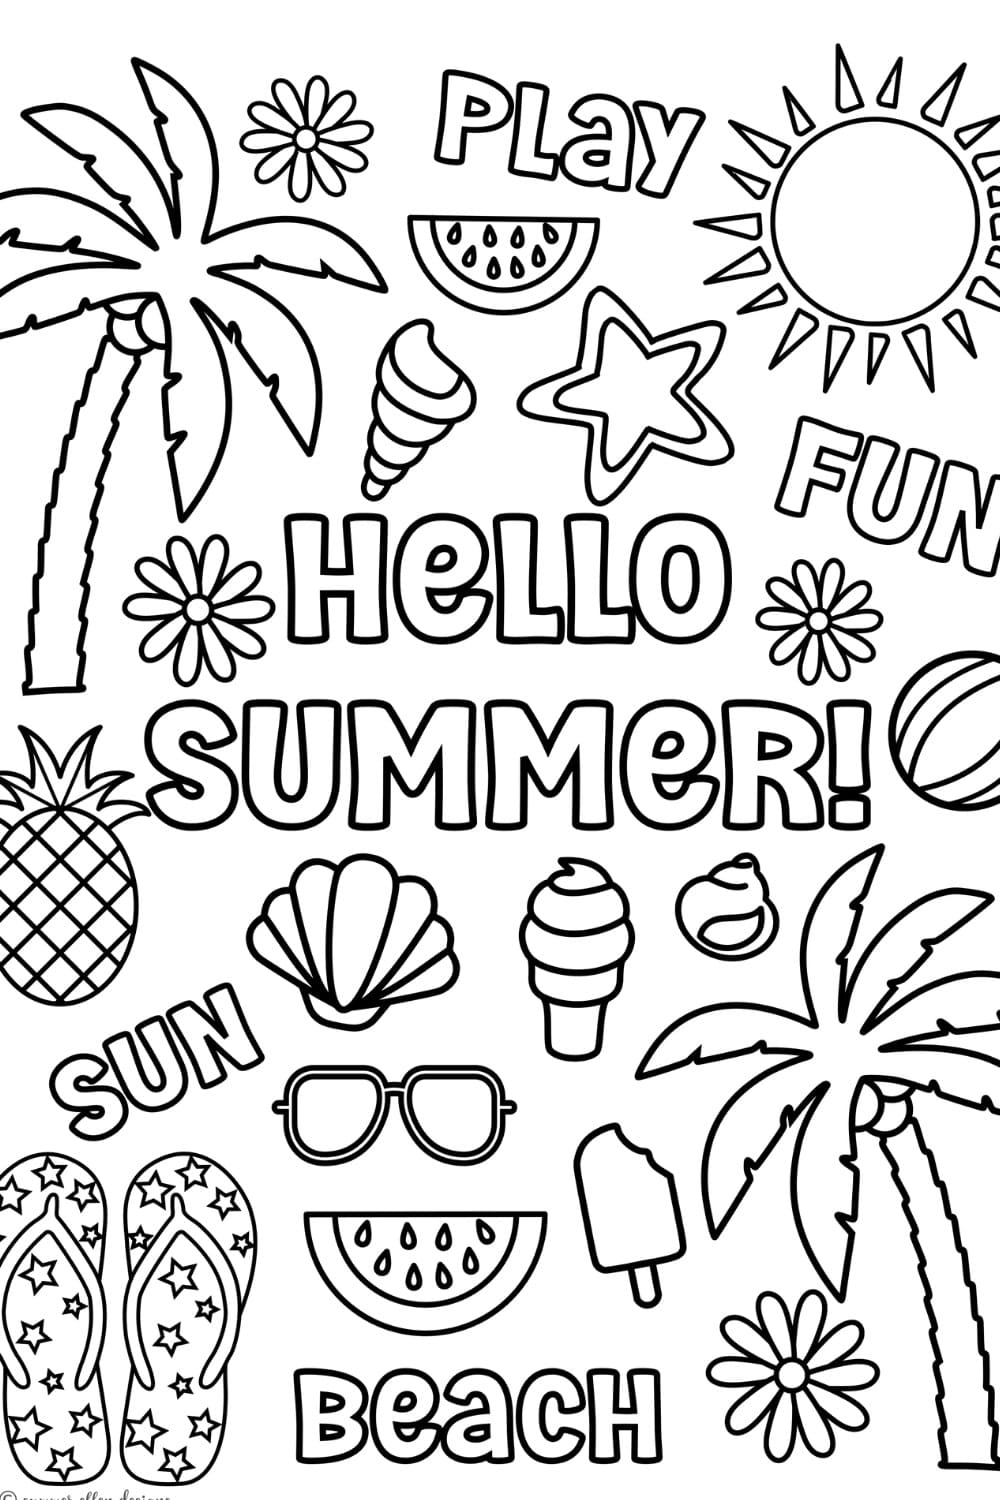 Printable hello summer image coloring page